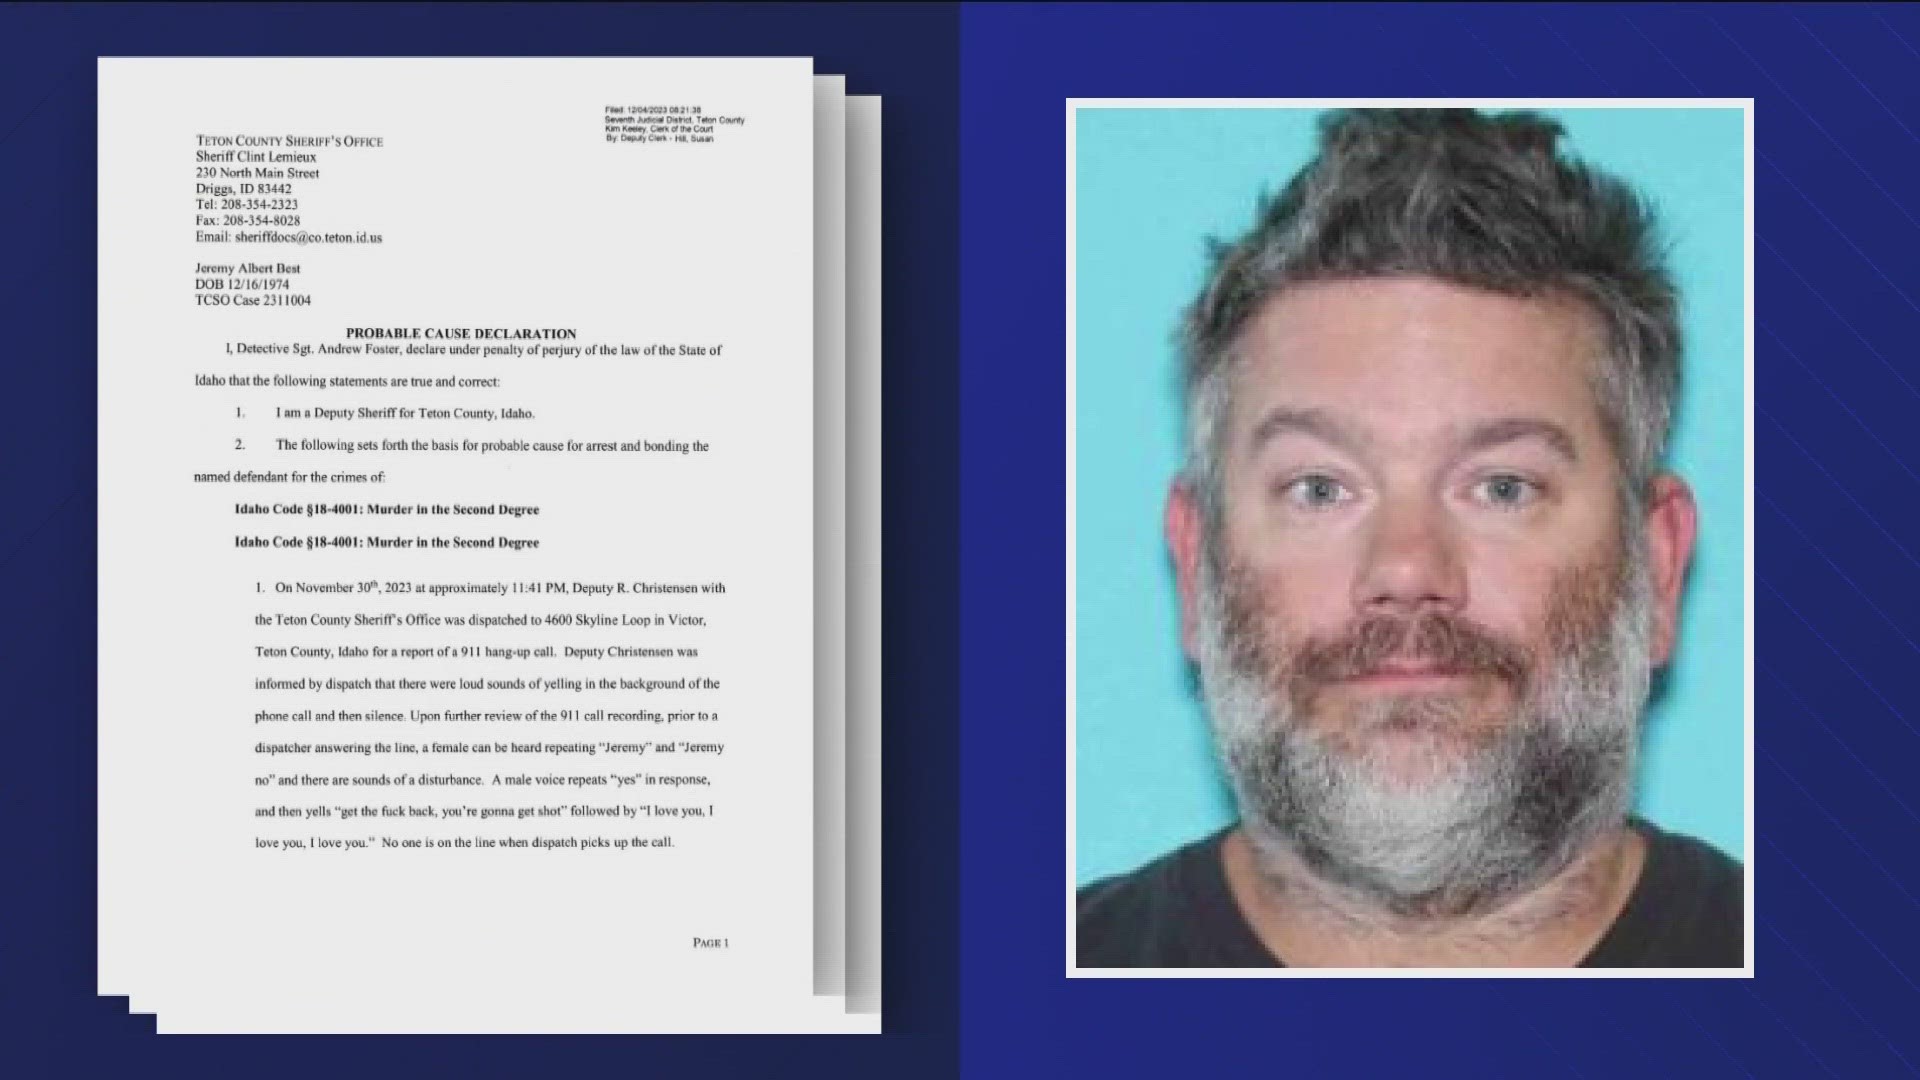 48-year-old Jeremy Best is charged with double murder based on new information from Teton County.